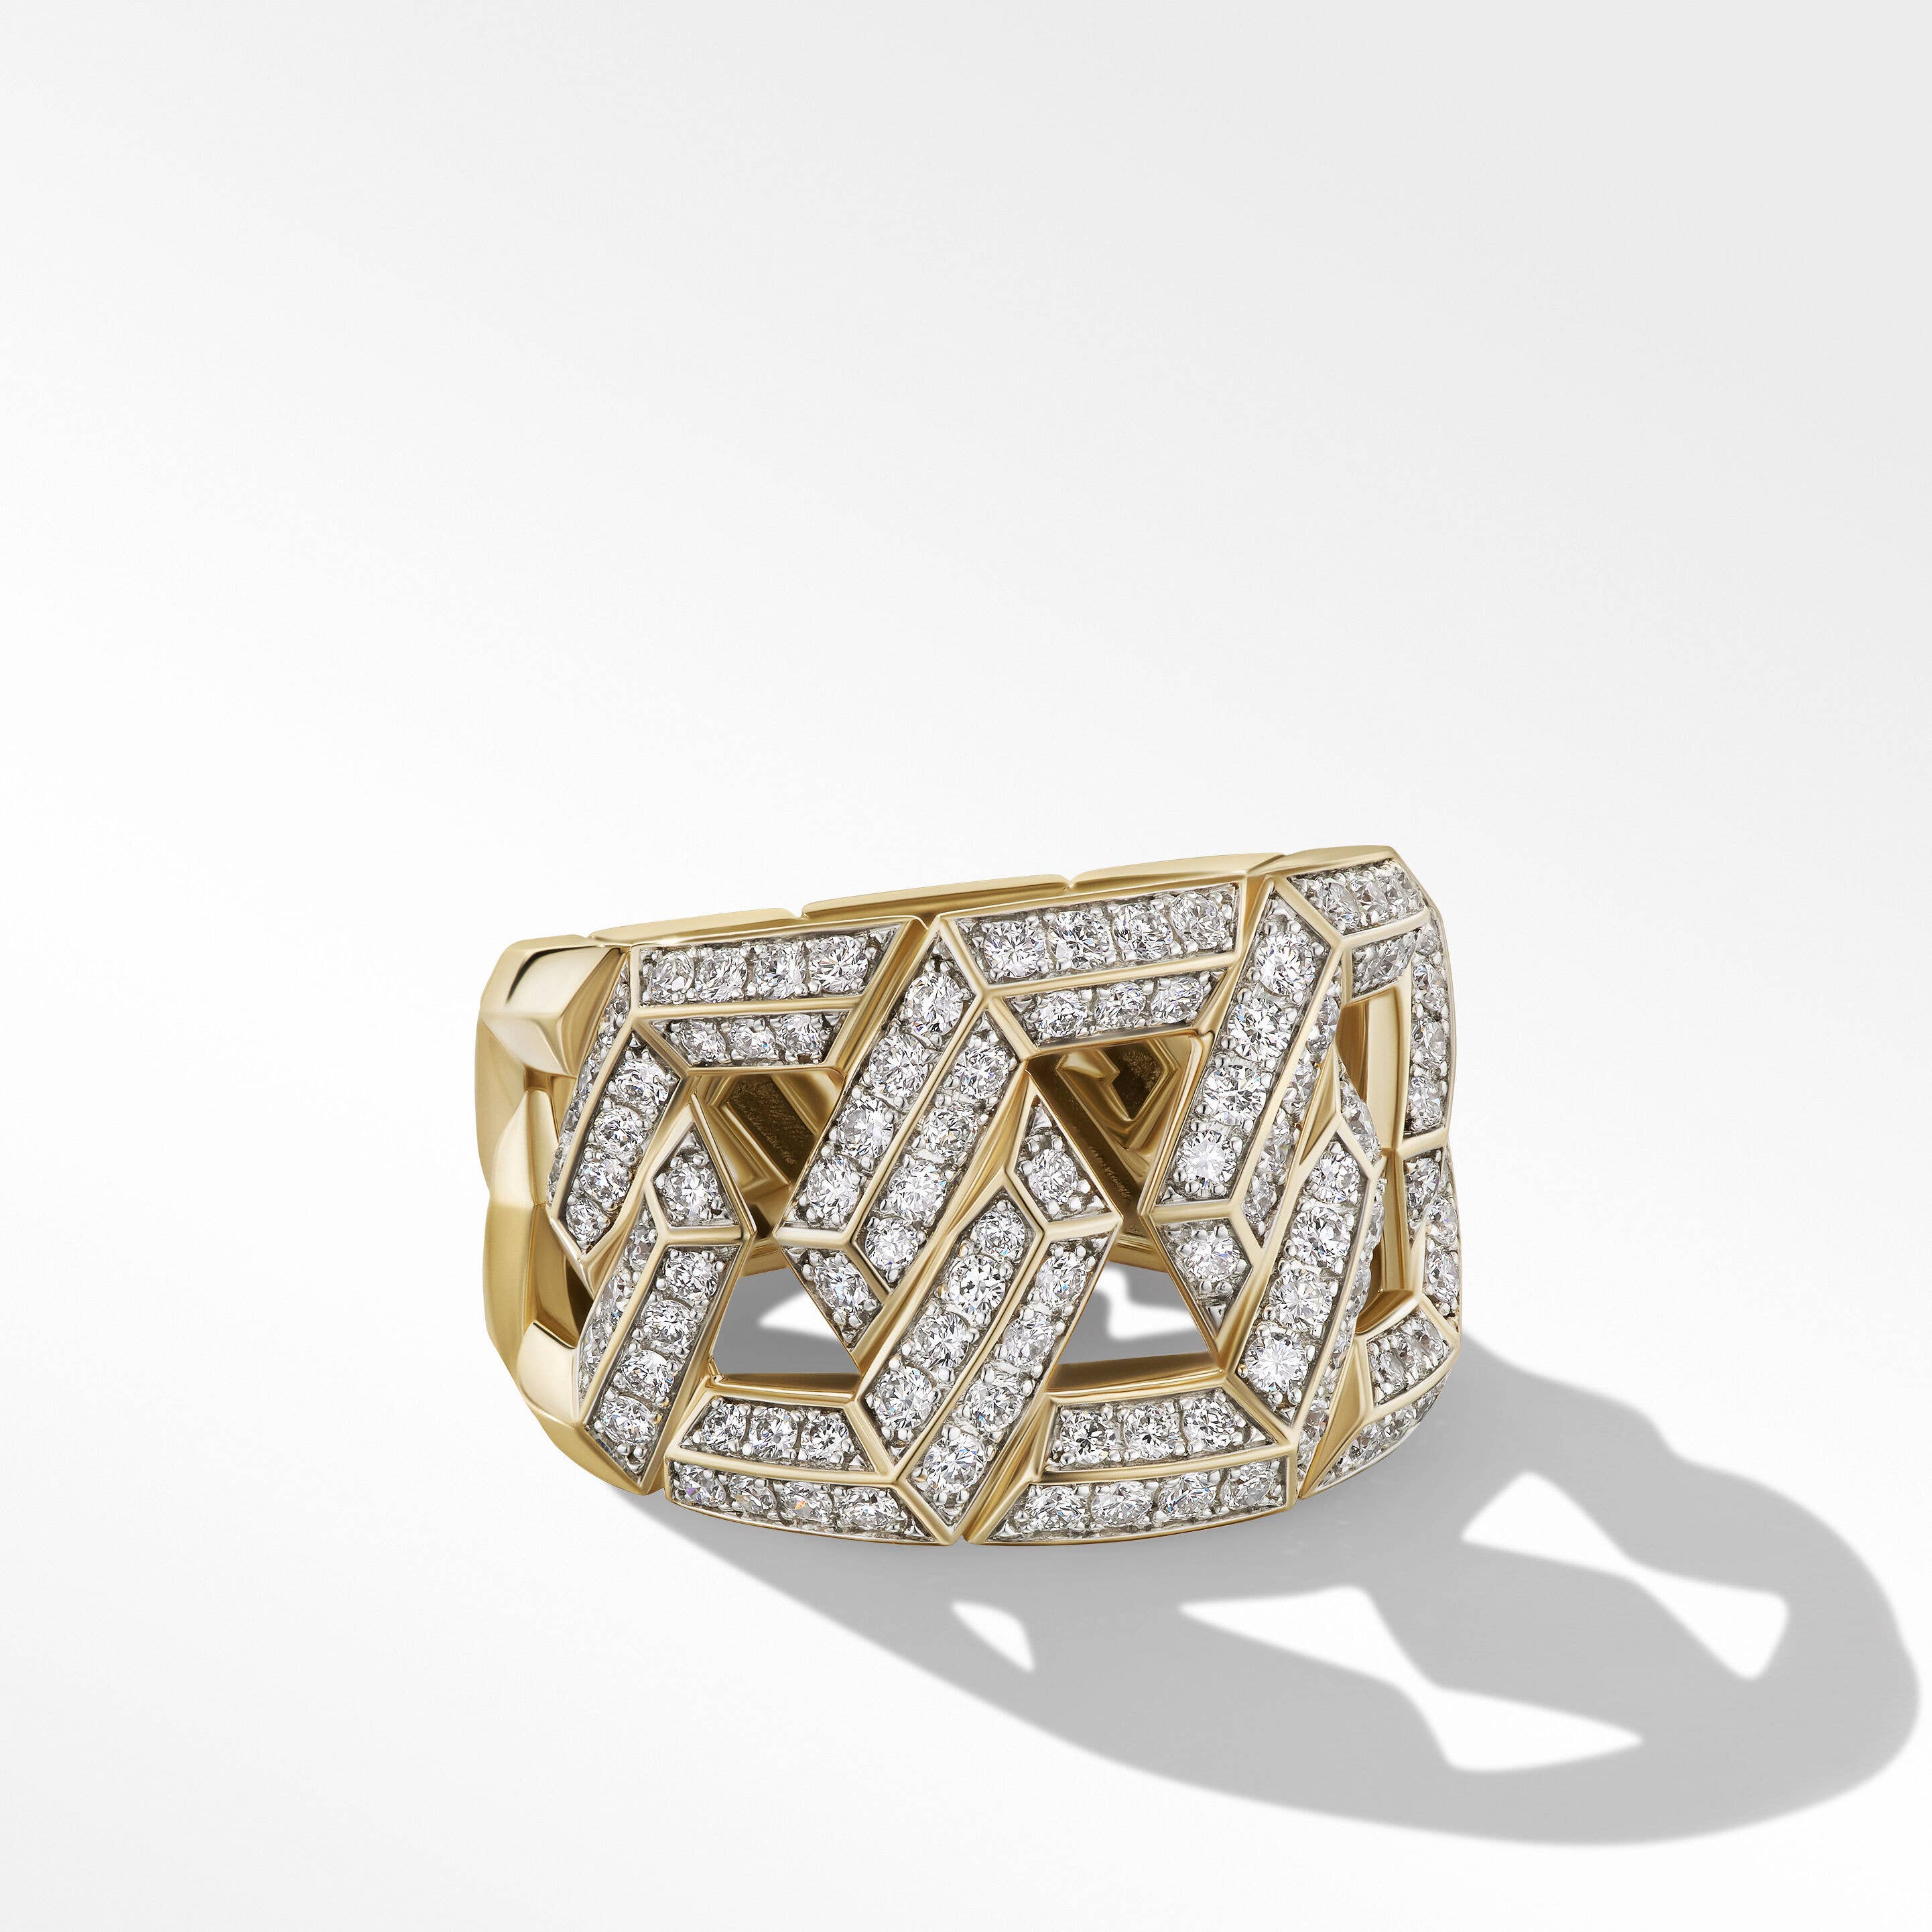 Carlyle™ Ring in 18K Yellow Gold with Pavé Diamonds